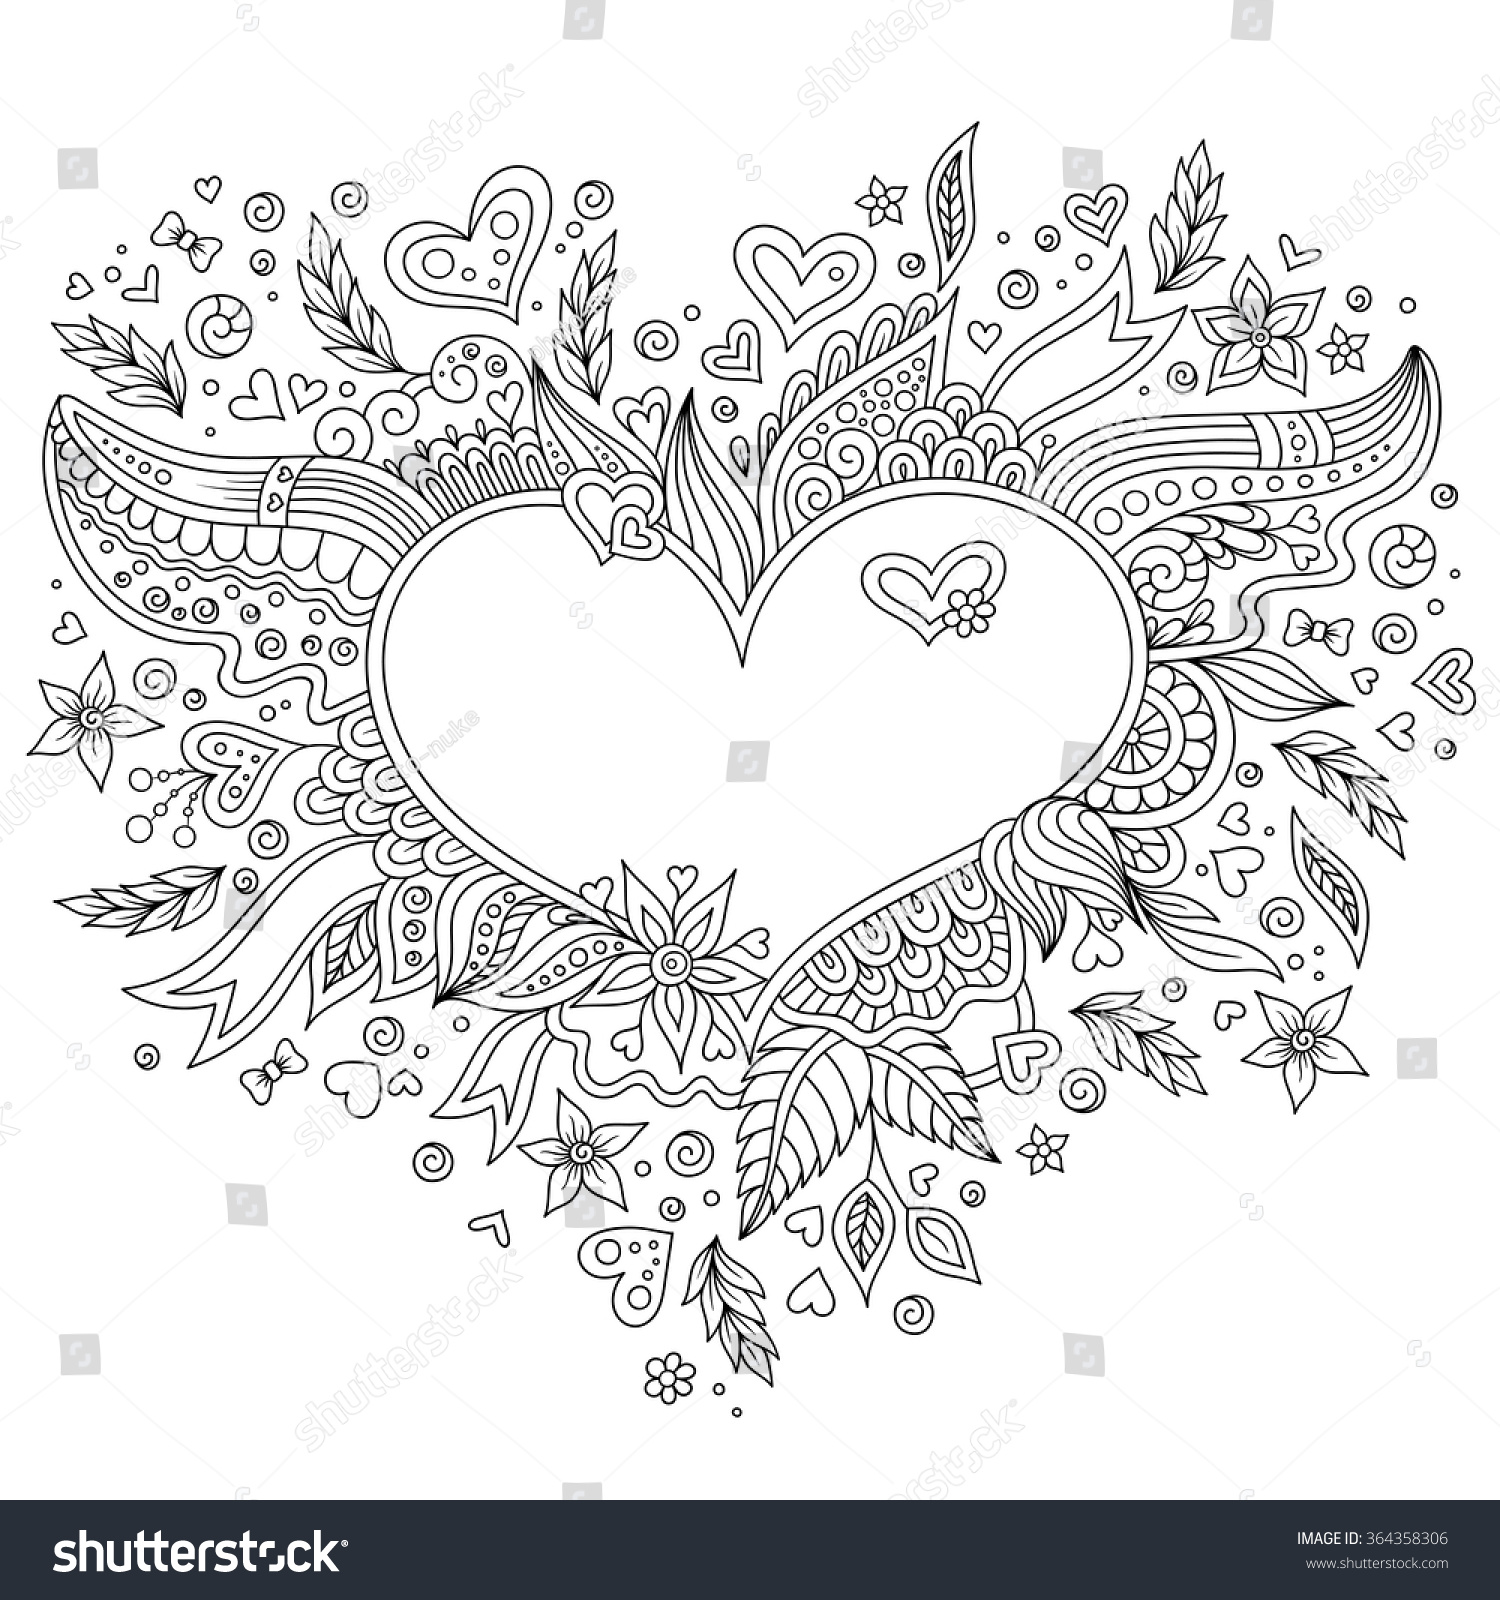 Coloring page flower heart st valentines stock vector royalty free